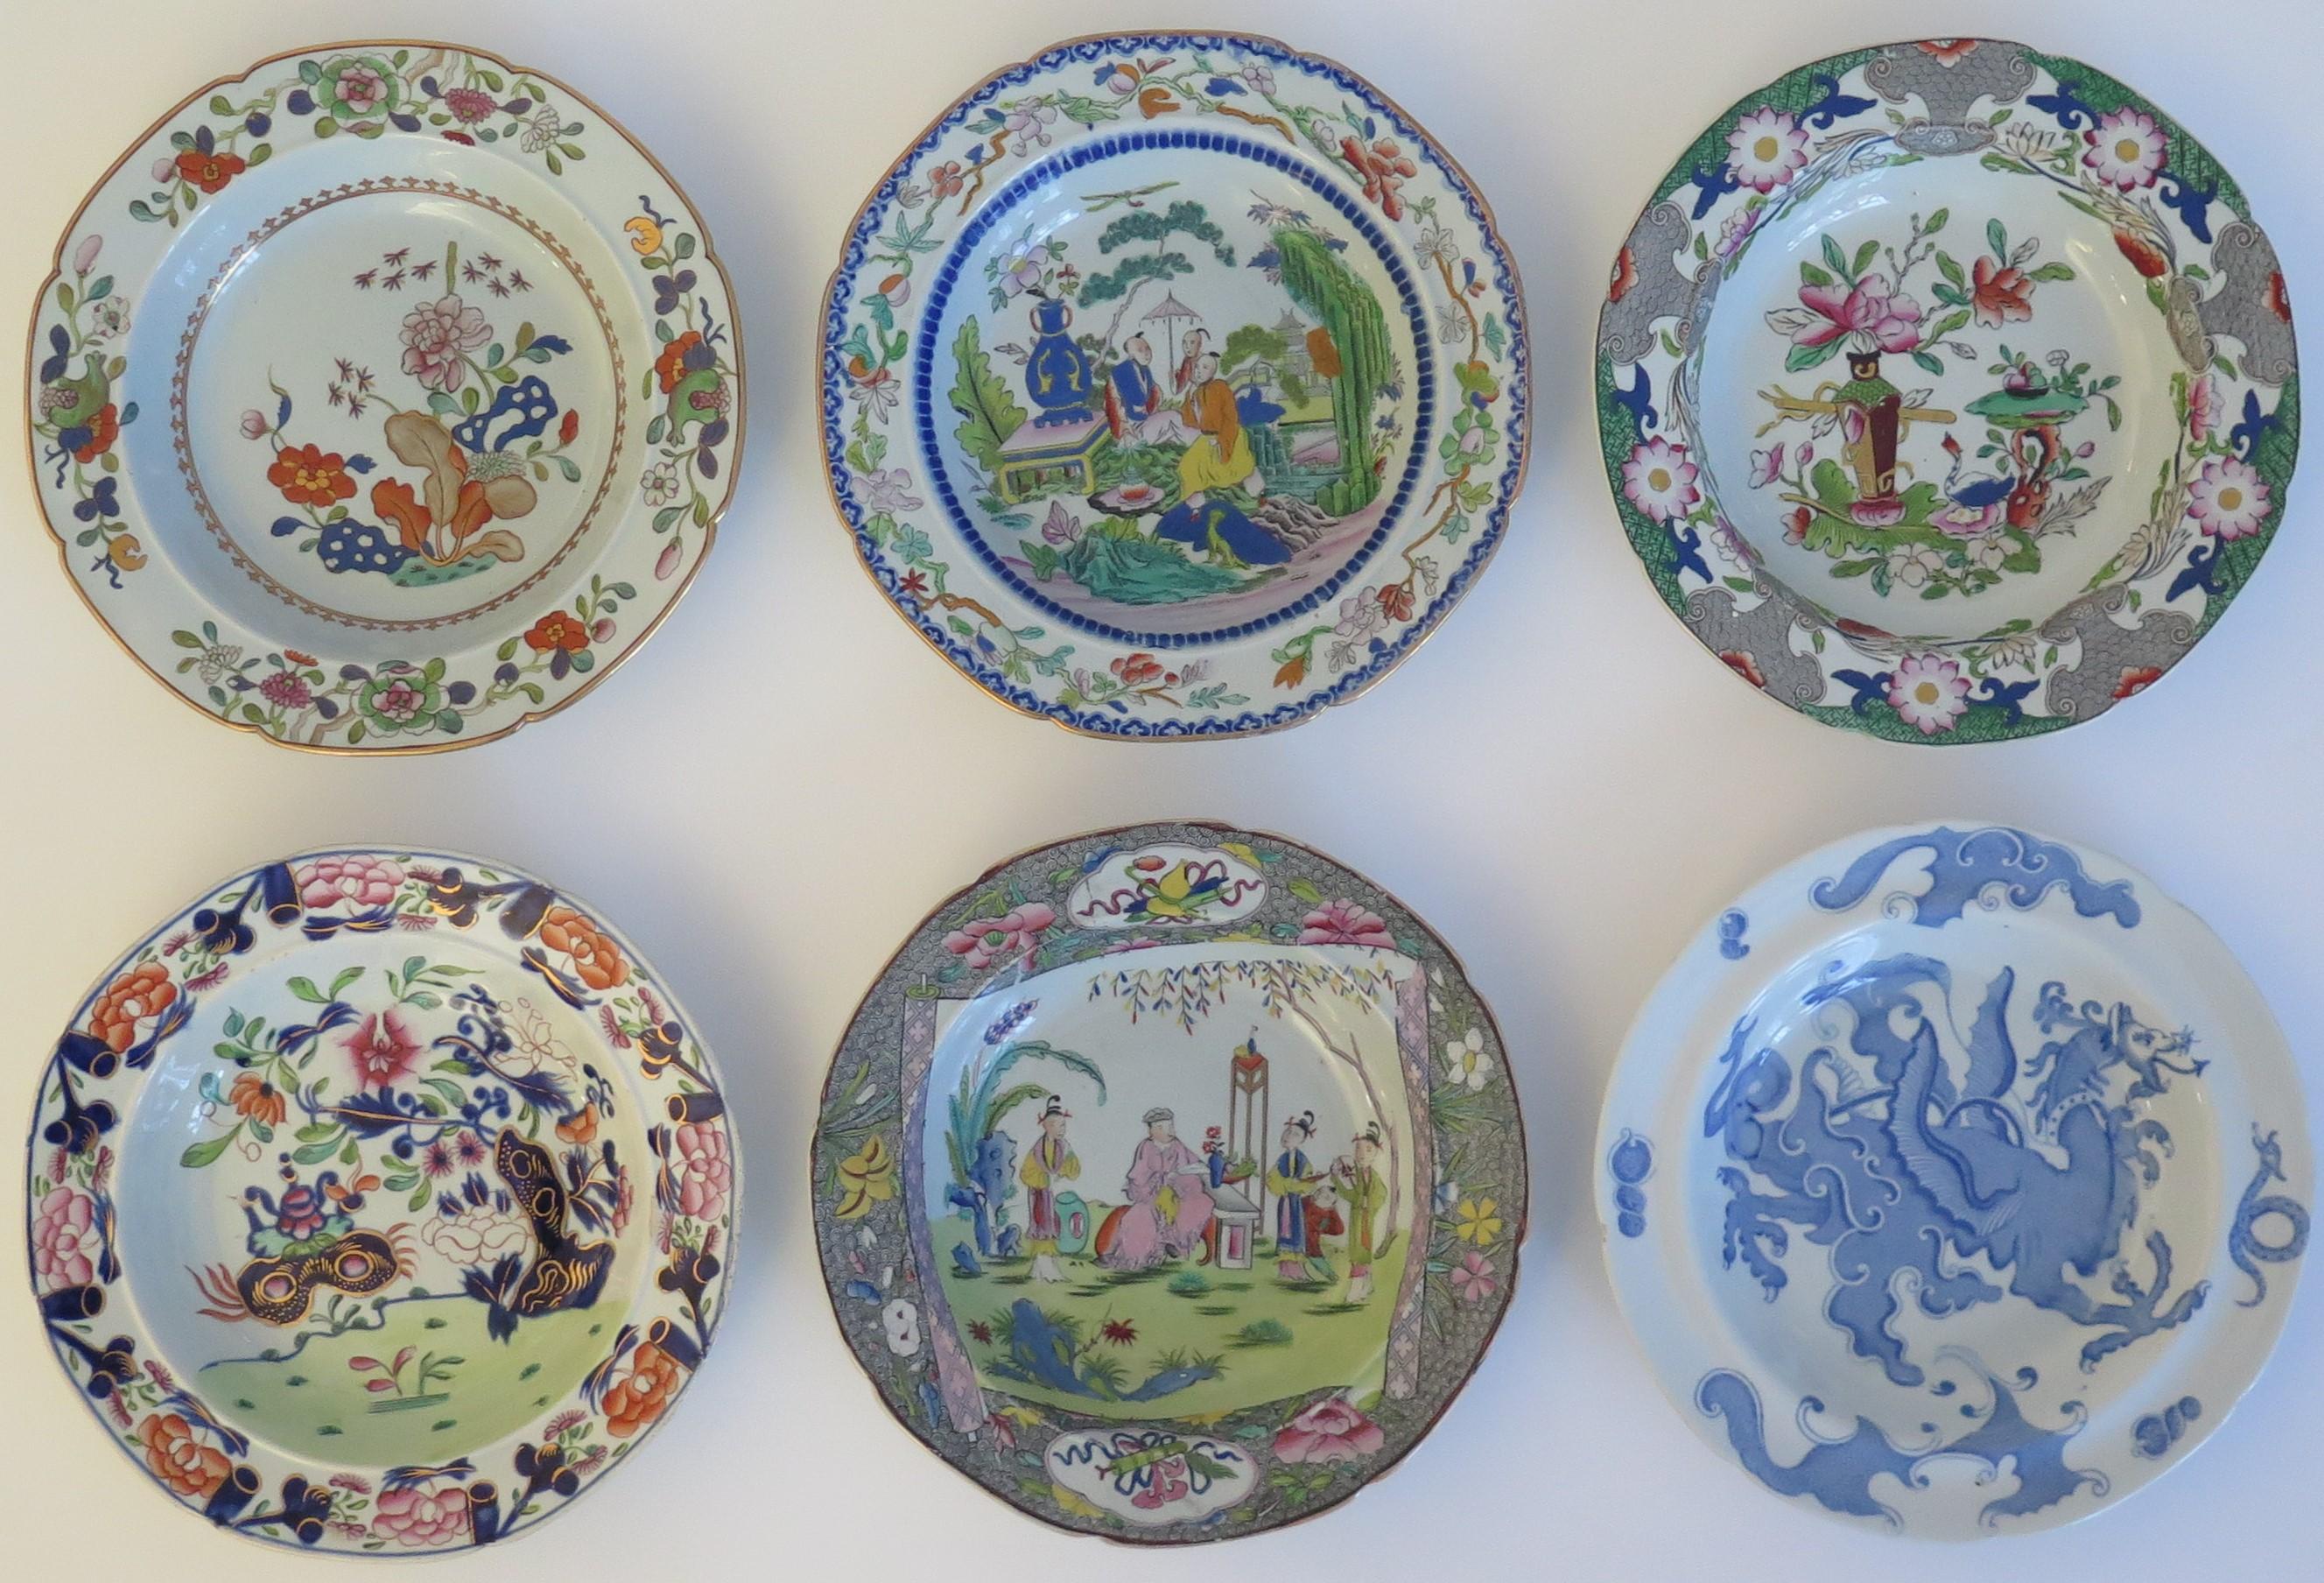 This is a harlequin set of SIX Mason's Ironstone soup plates or bowls, all dating to the earliest recorded George 3rd period between 1813 and 1820.

These large soup bowls or plates compliment the large Mason's dinner plates we also have listed but